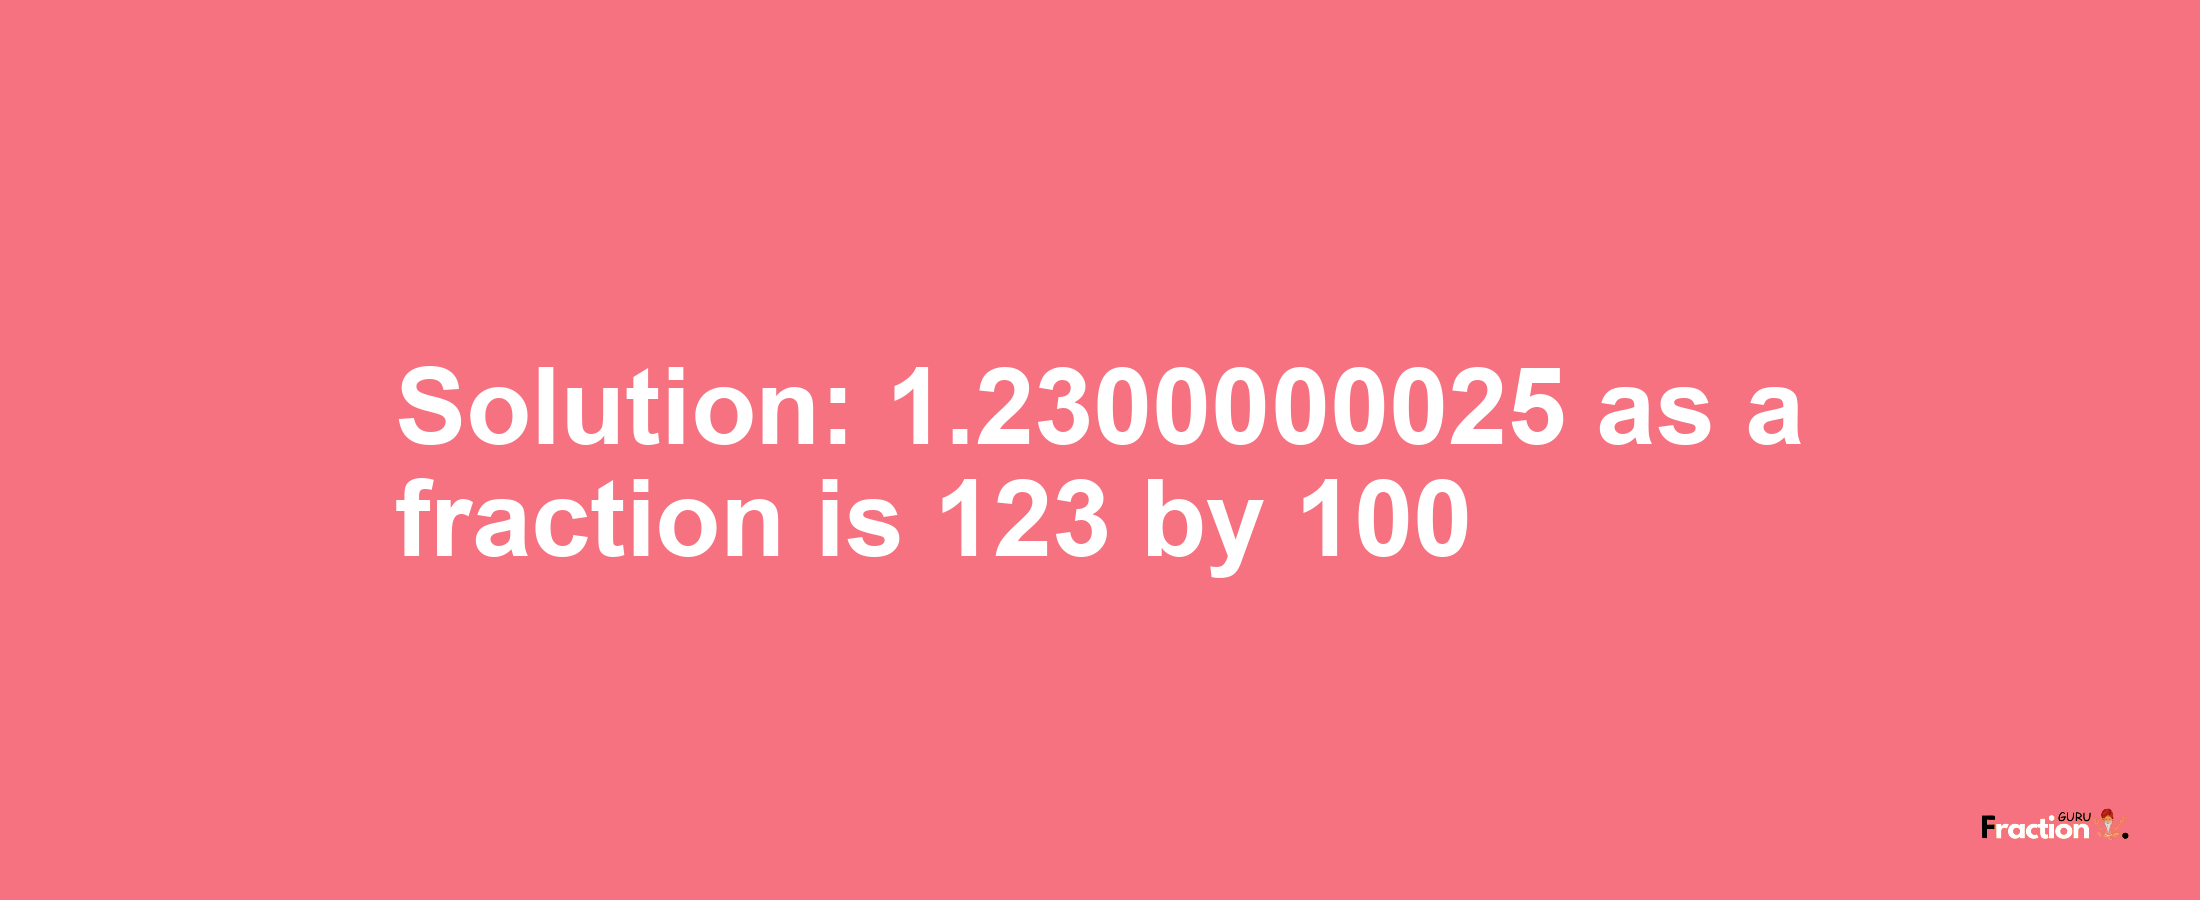 Solution:1.2300000025 as a fraction is 123/100